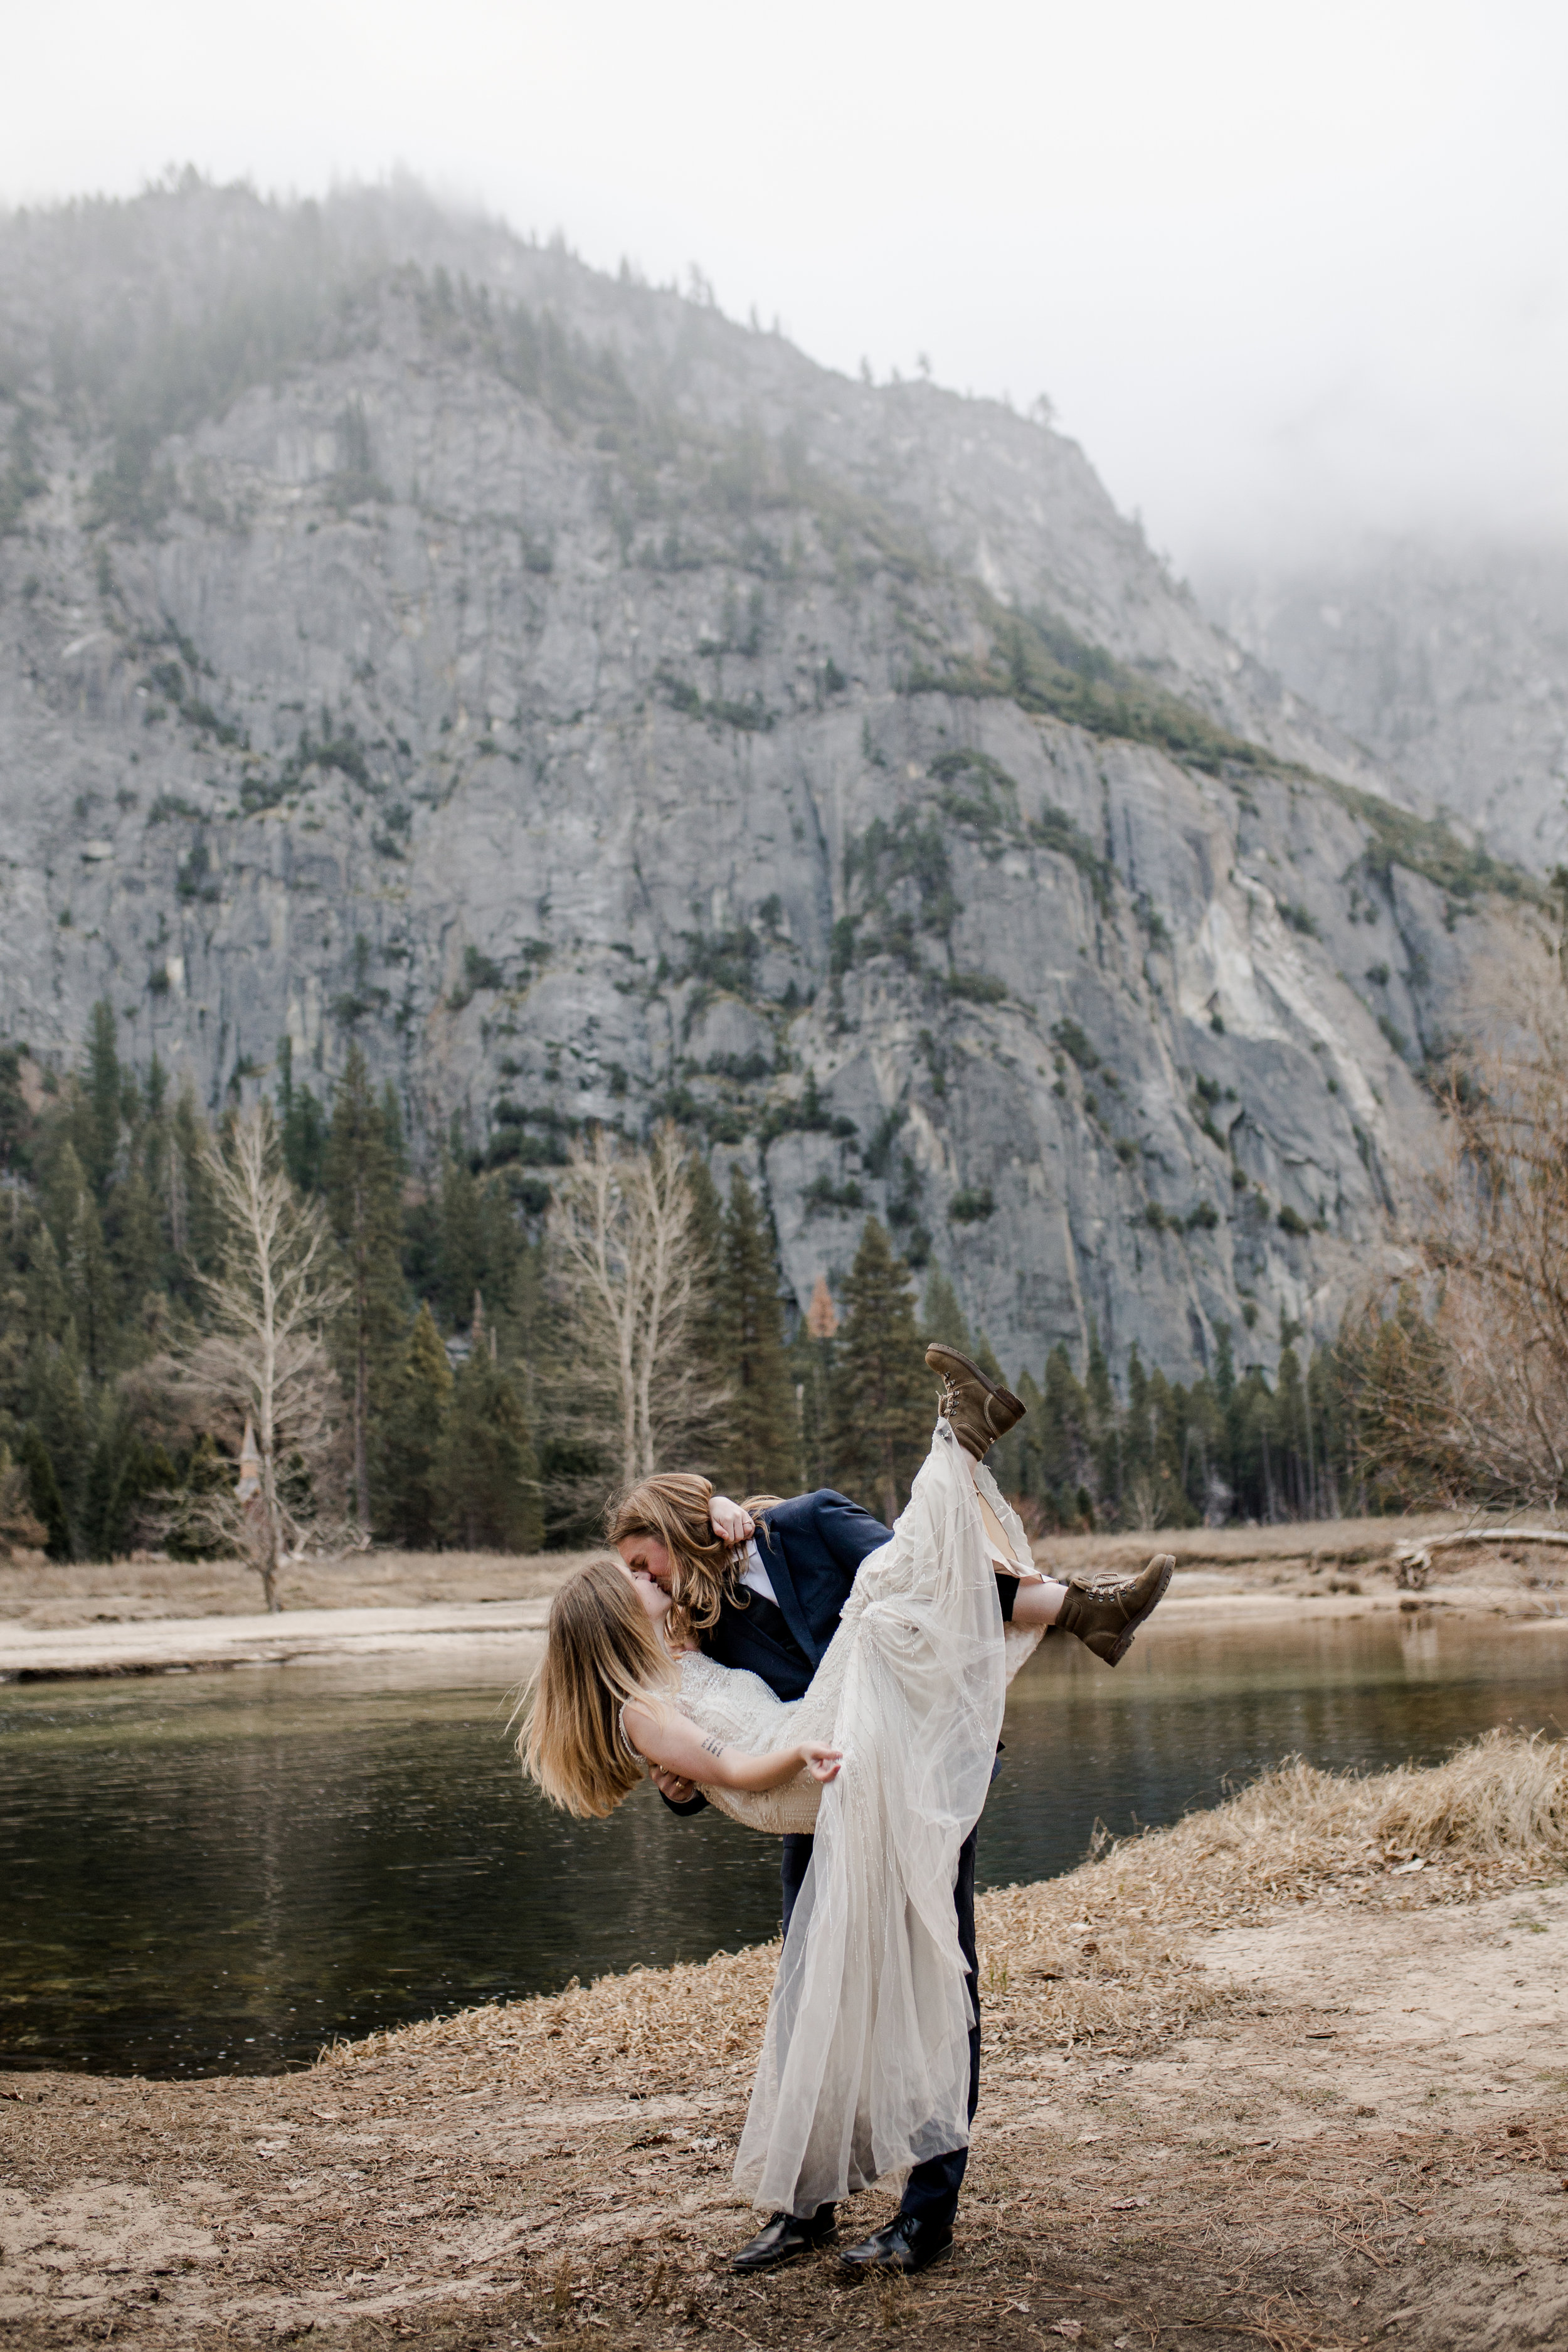 nicole-daacke-photography-yousemite-national-park-elopement-photographer-winter-cloud-moody-elope-inspiration-yosemite-valley-tunnel-view-winter-cloud-fog-weather-wedding-photos-43.jpg